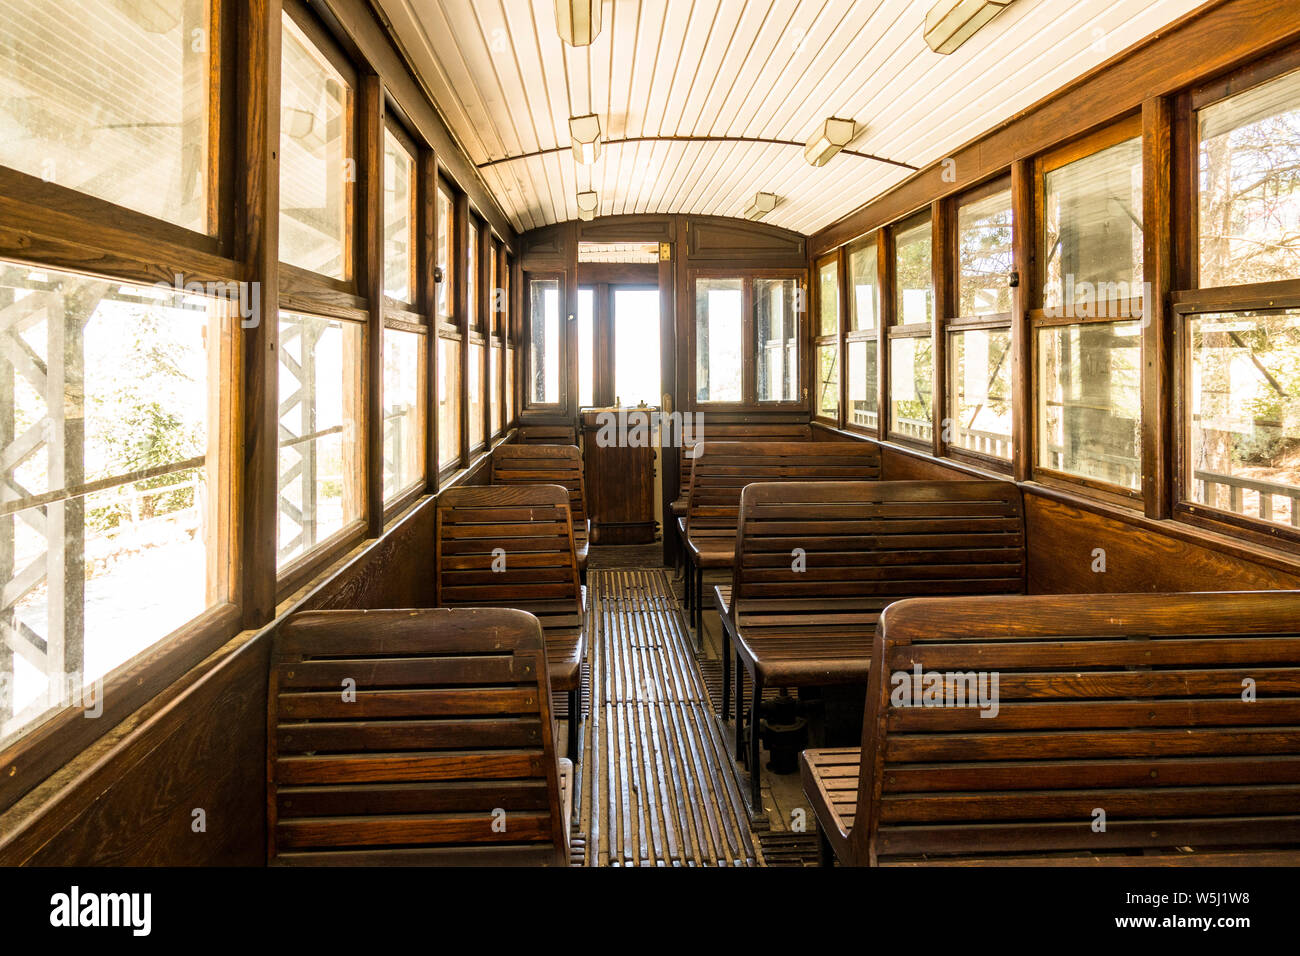 Interior of old tram, used in Sierra Nevada mountains, Spain. Stock Photo